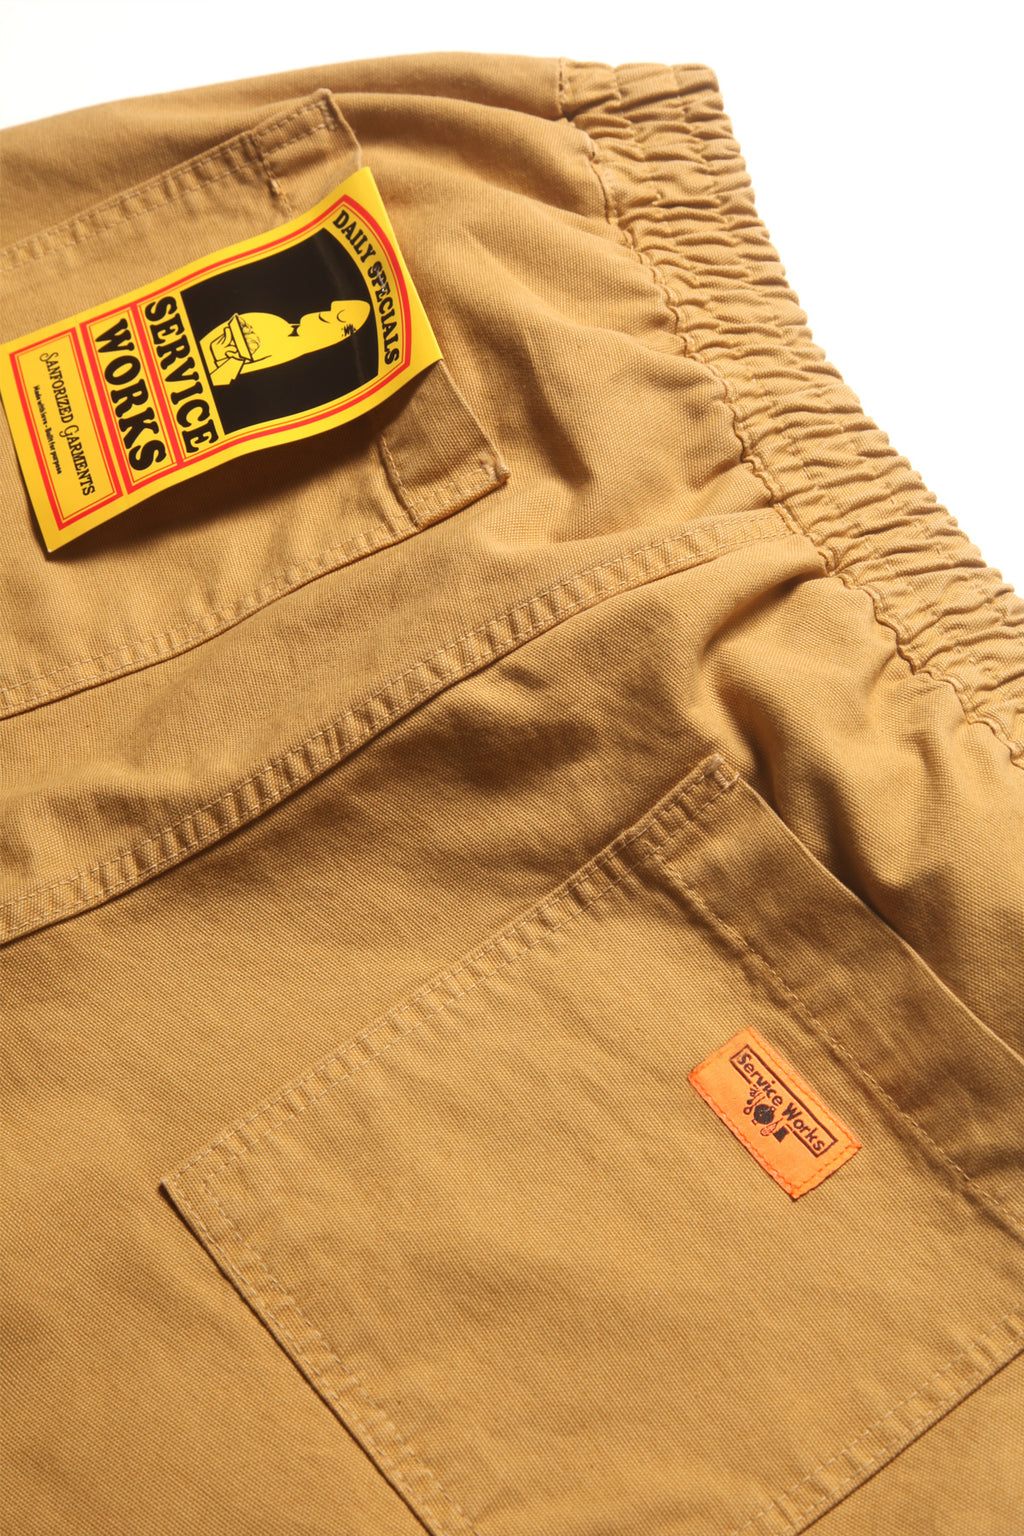 Service Works - Classic Chef Shorts - Tan